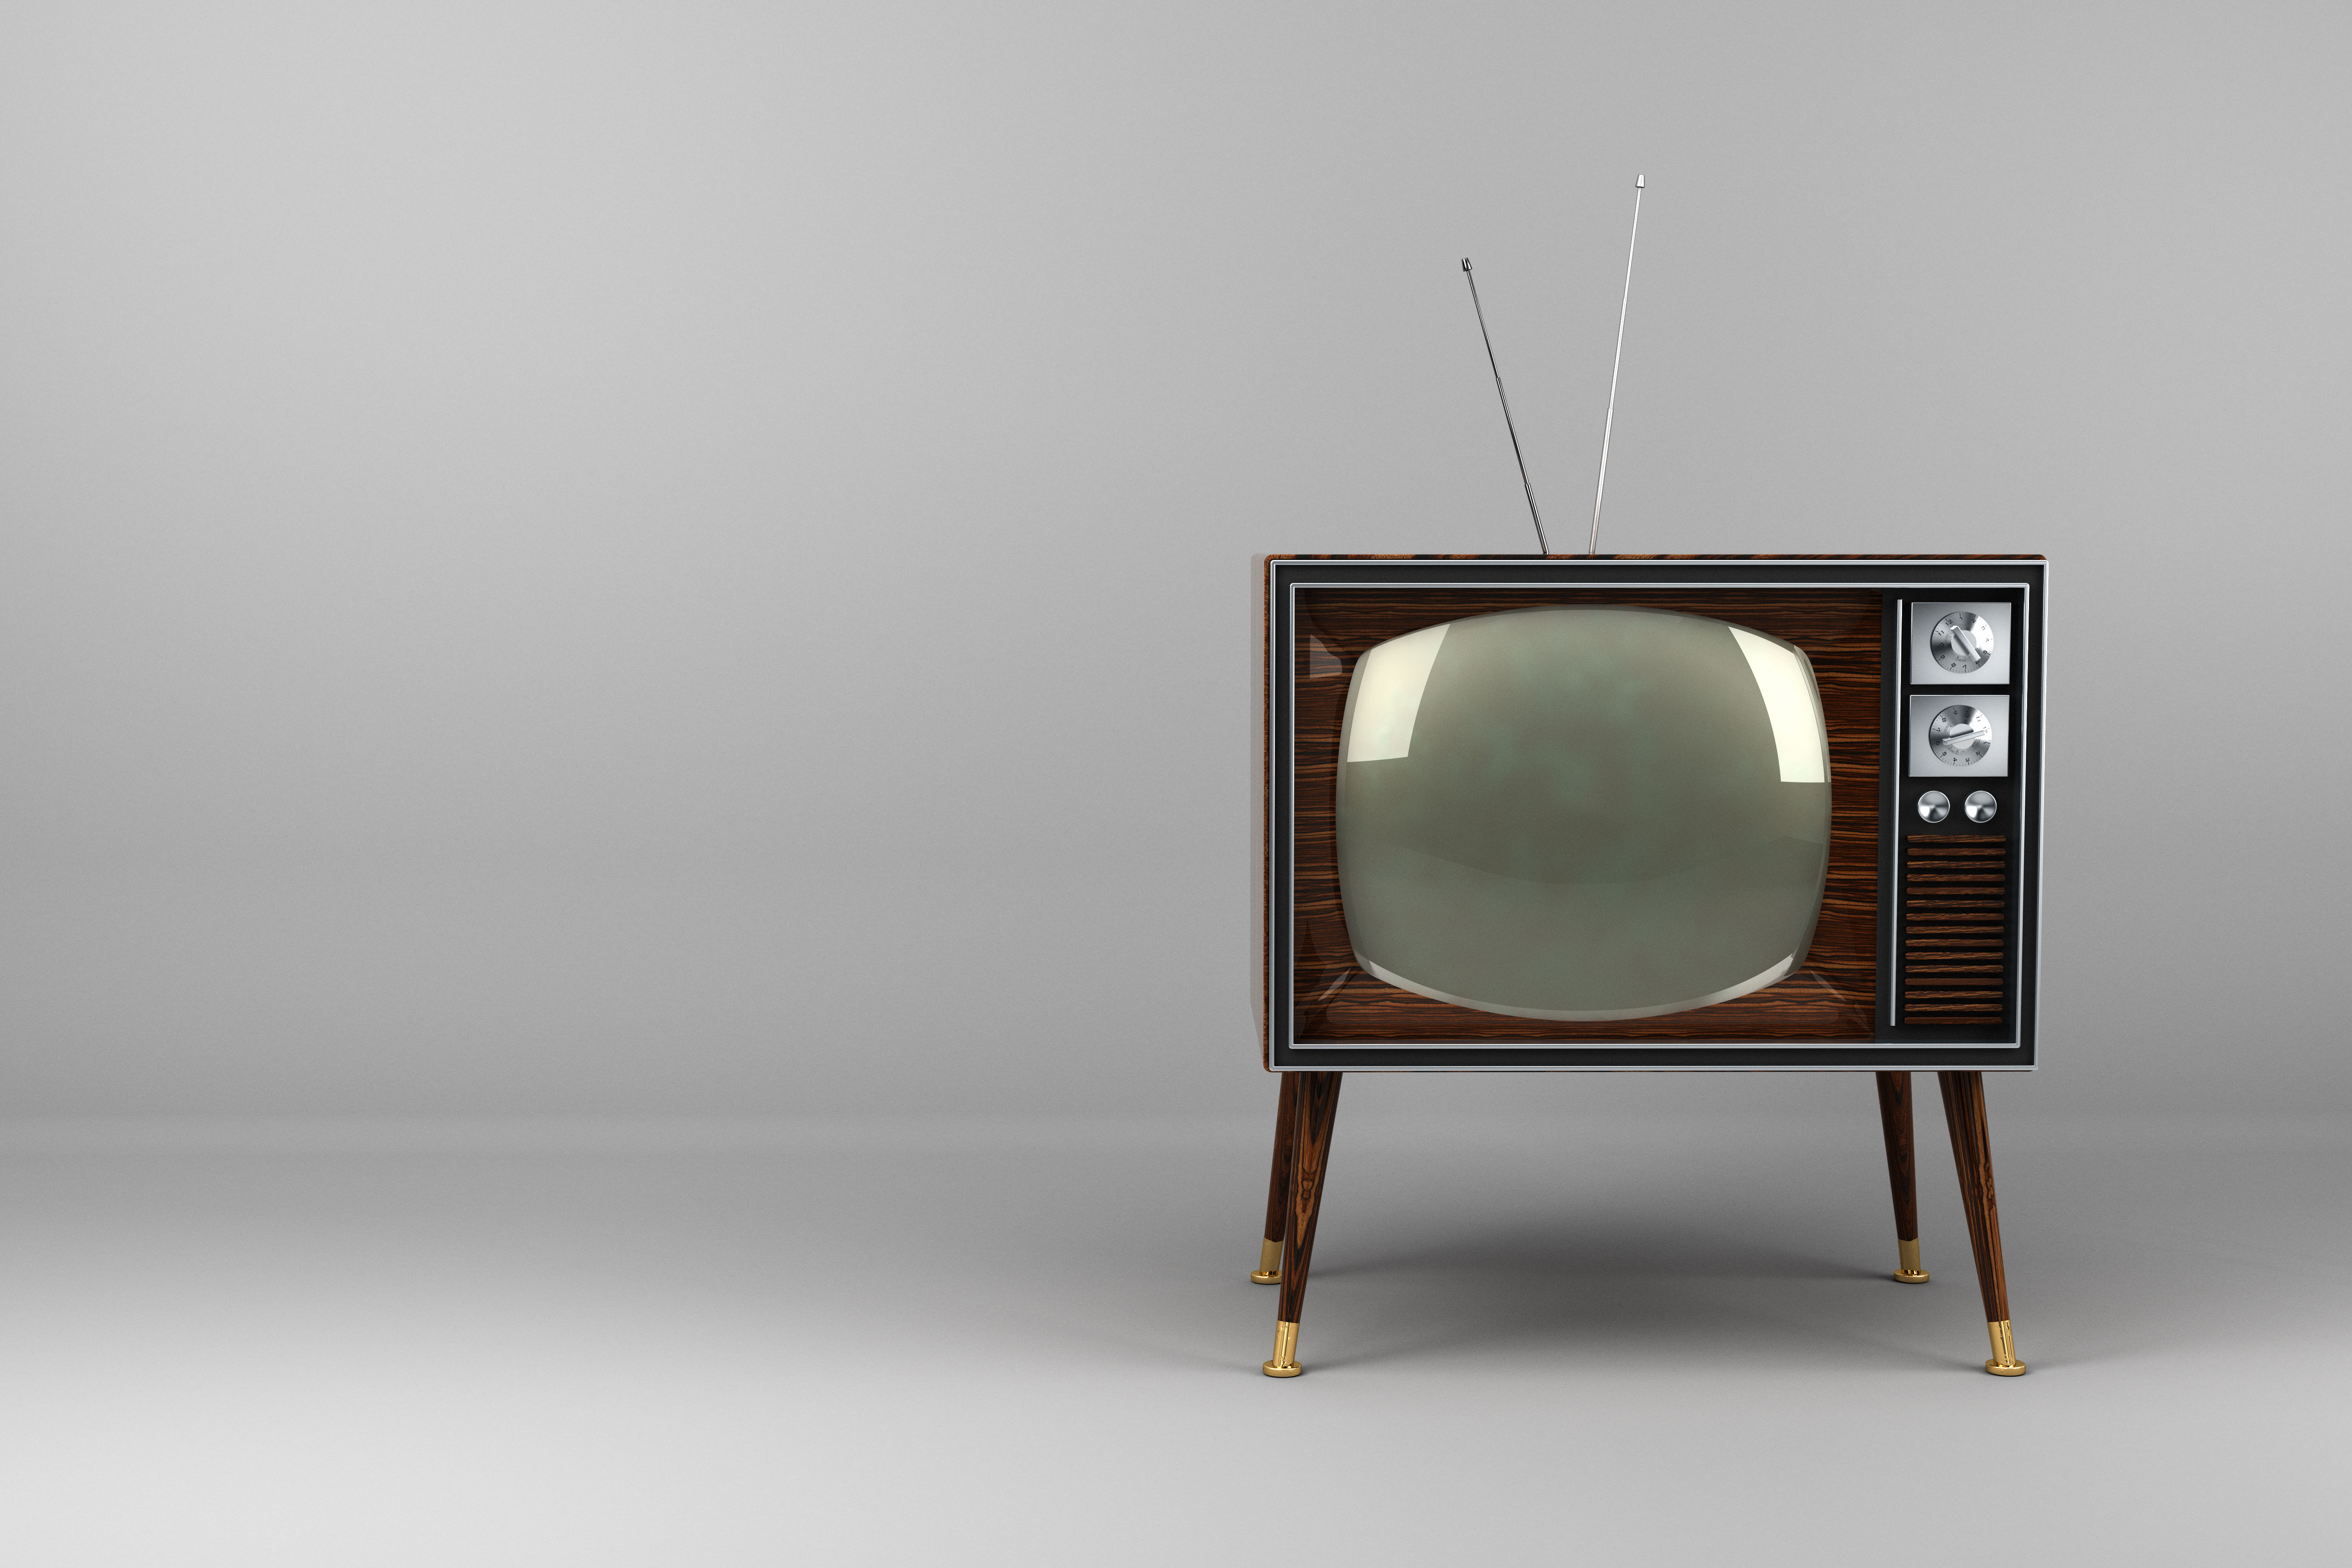 An old-fashioned TV.